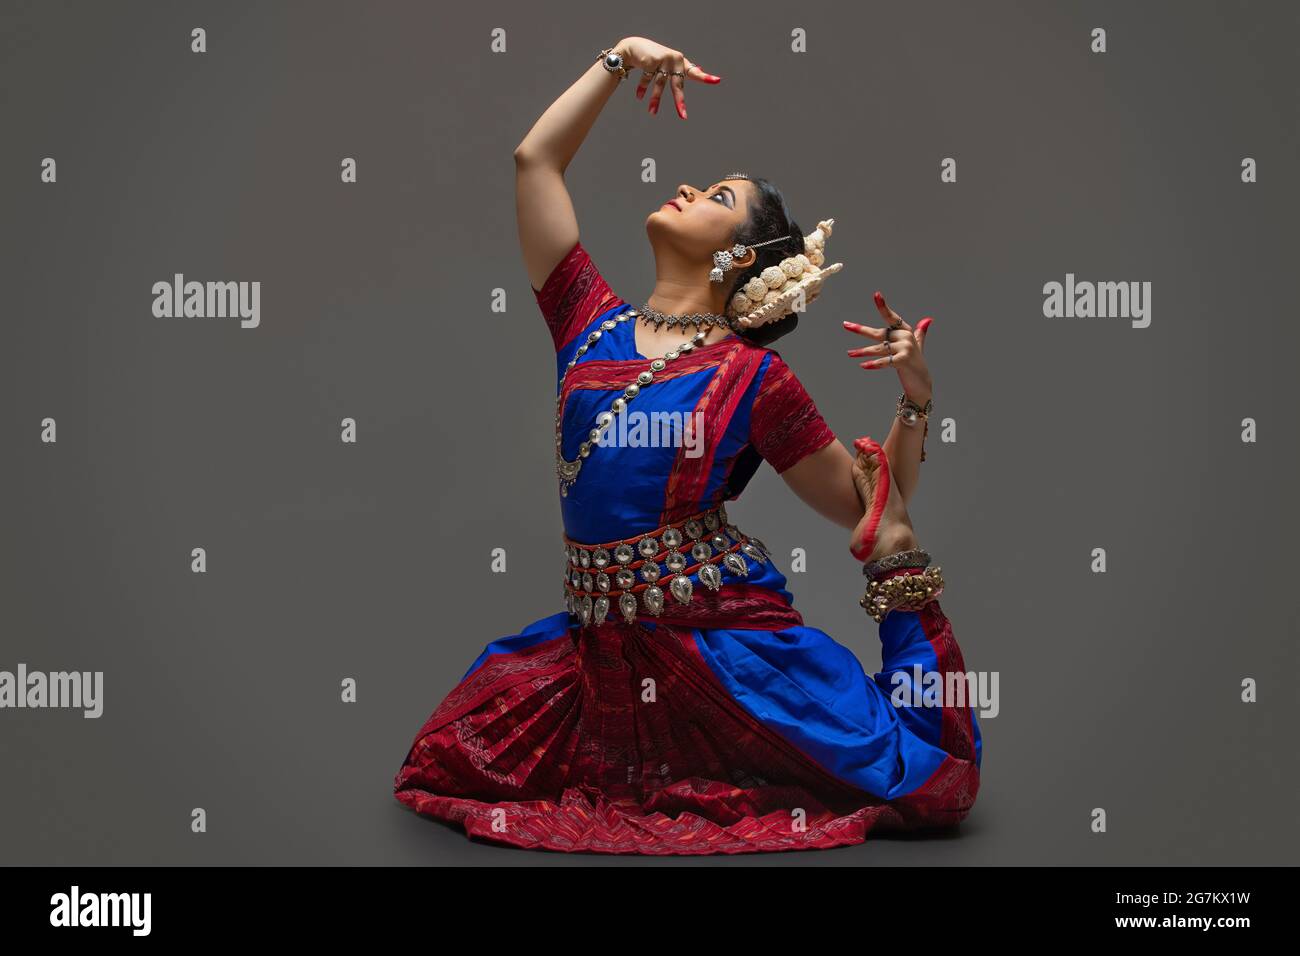 Odissi Dance, Mukteshwar Temple | Dance photography poses, Indian classical  dance, Indian classical dancer